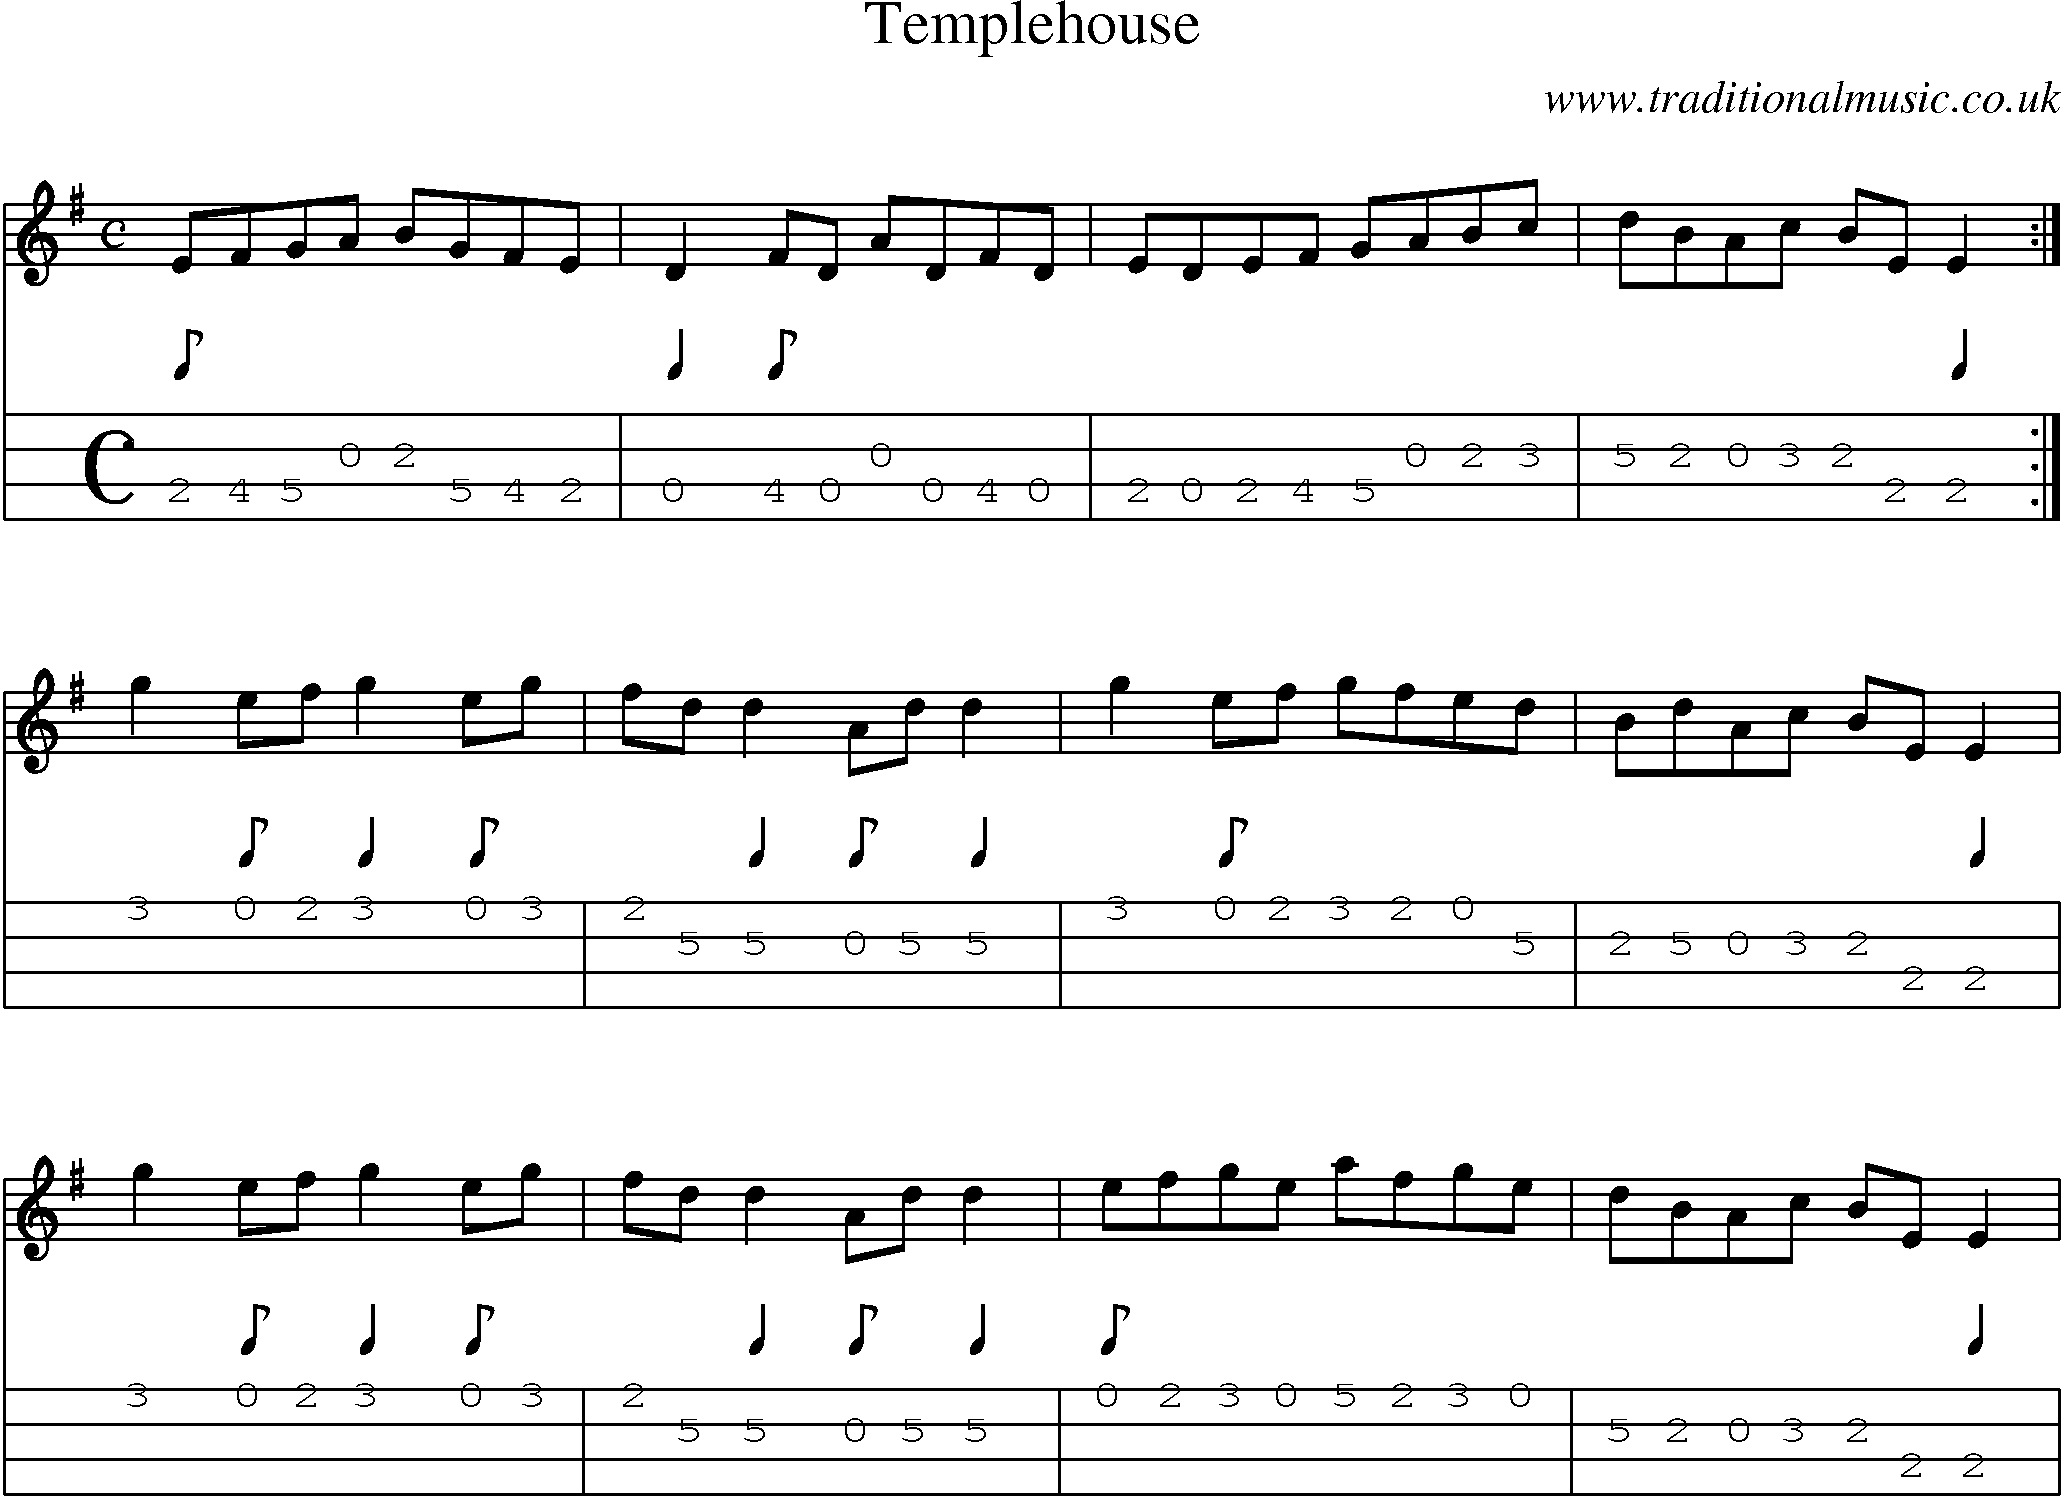 Music Score and Mandolin Tabs for Templehouse